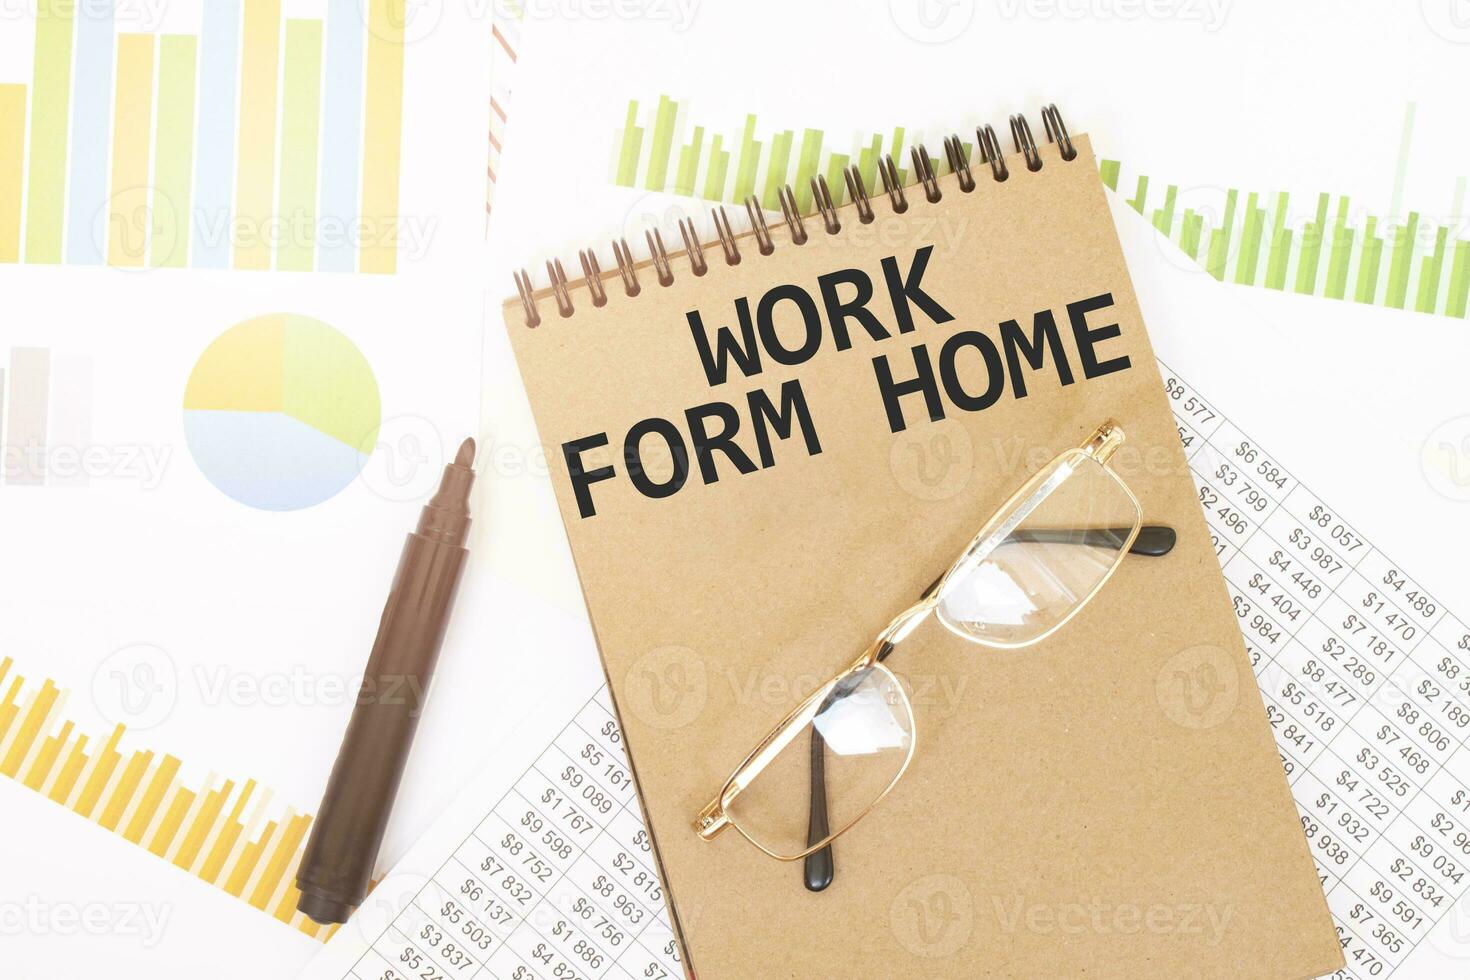 In a craft colour notebook is a WORK FROM HOME inscription, next to pencils, glasses, graphs and diagrams. photo